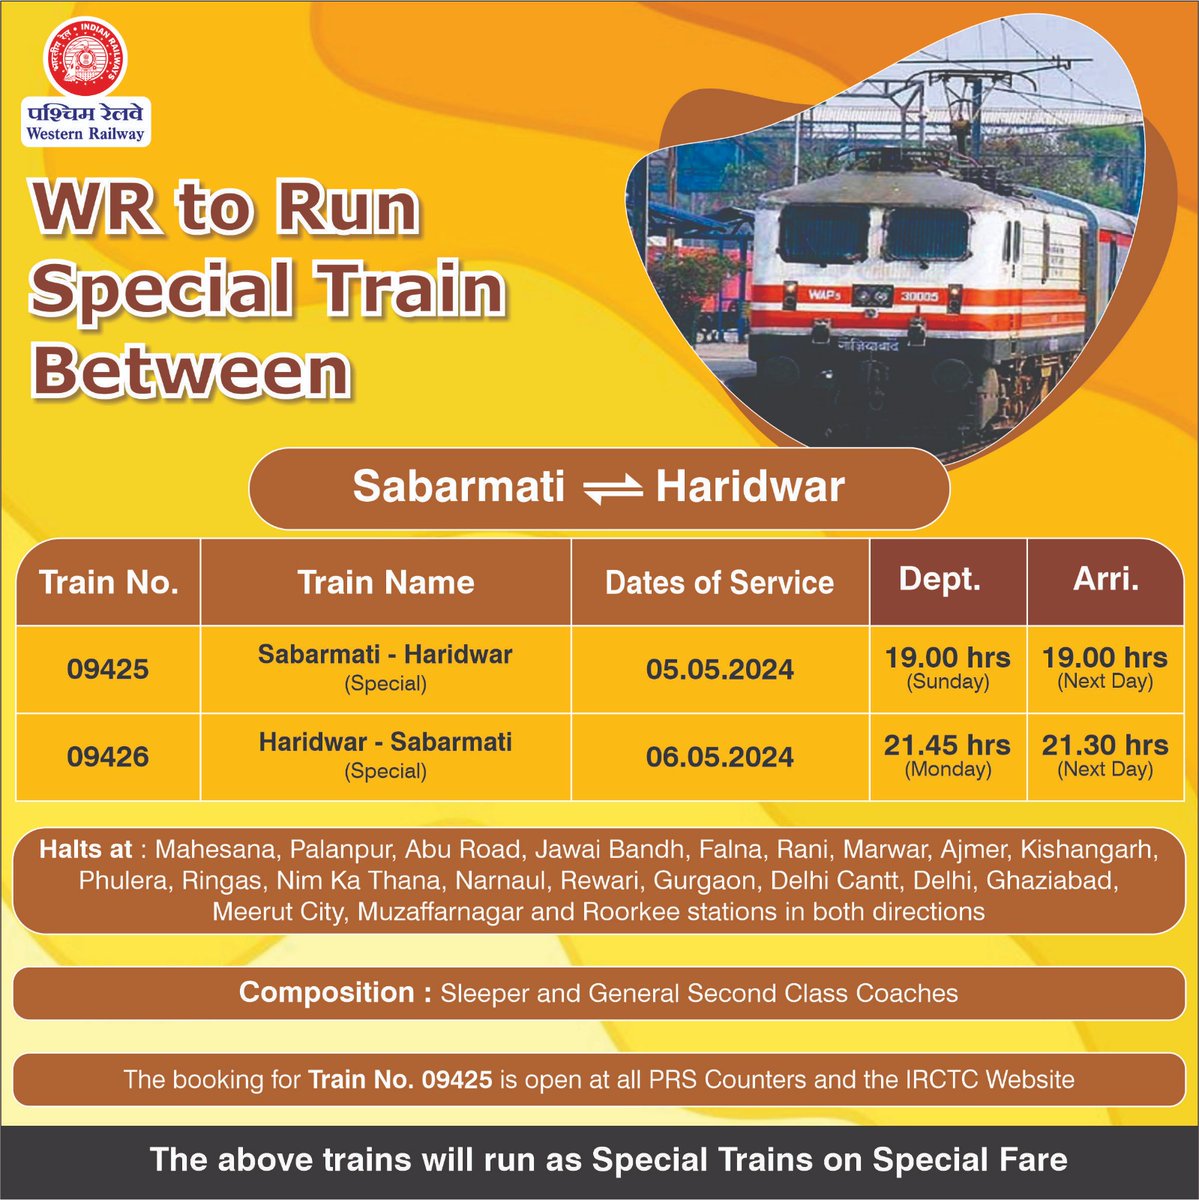 👉WR to Run Special Train Between 
Sabarmati ↔️ Haridwar

✅The booking for Train No. 09425 is open at all PRS Counters and the IRCTC Website.
@WesternRly